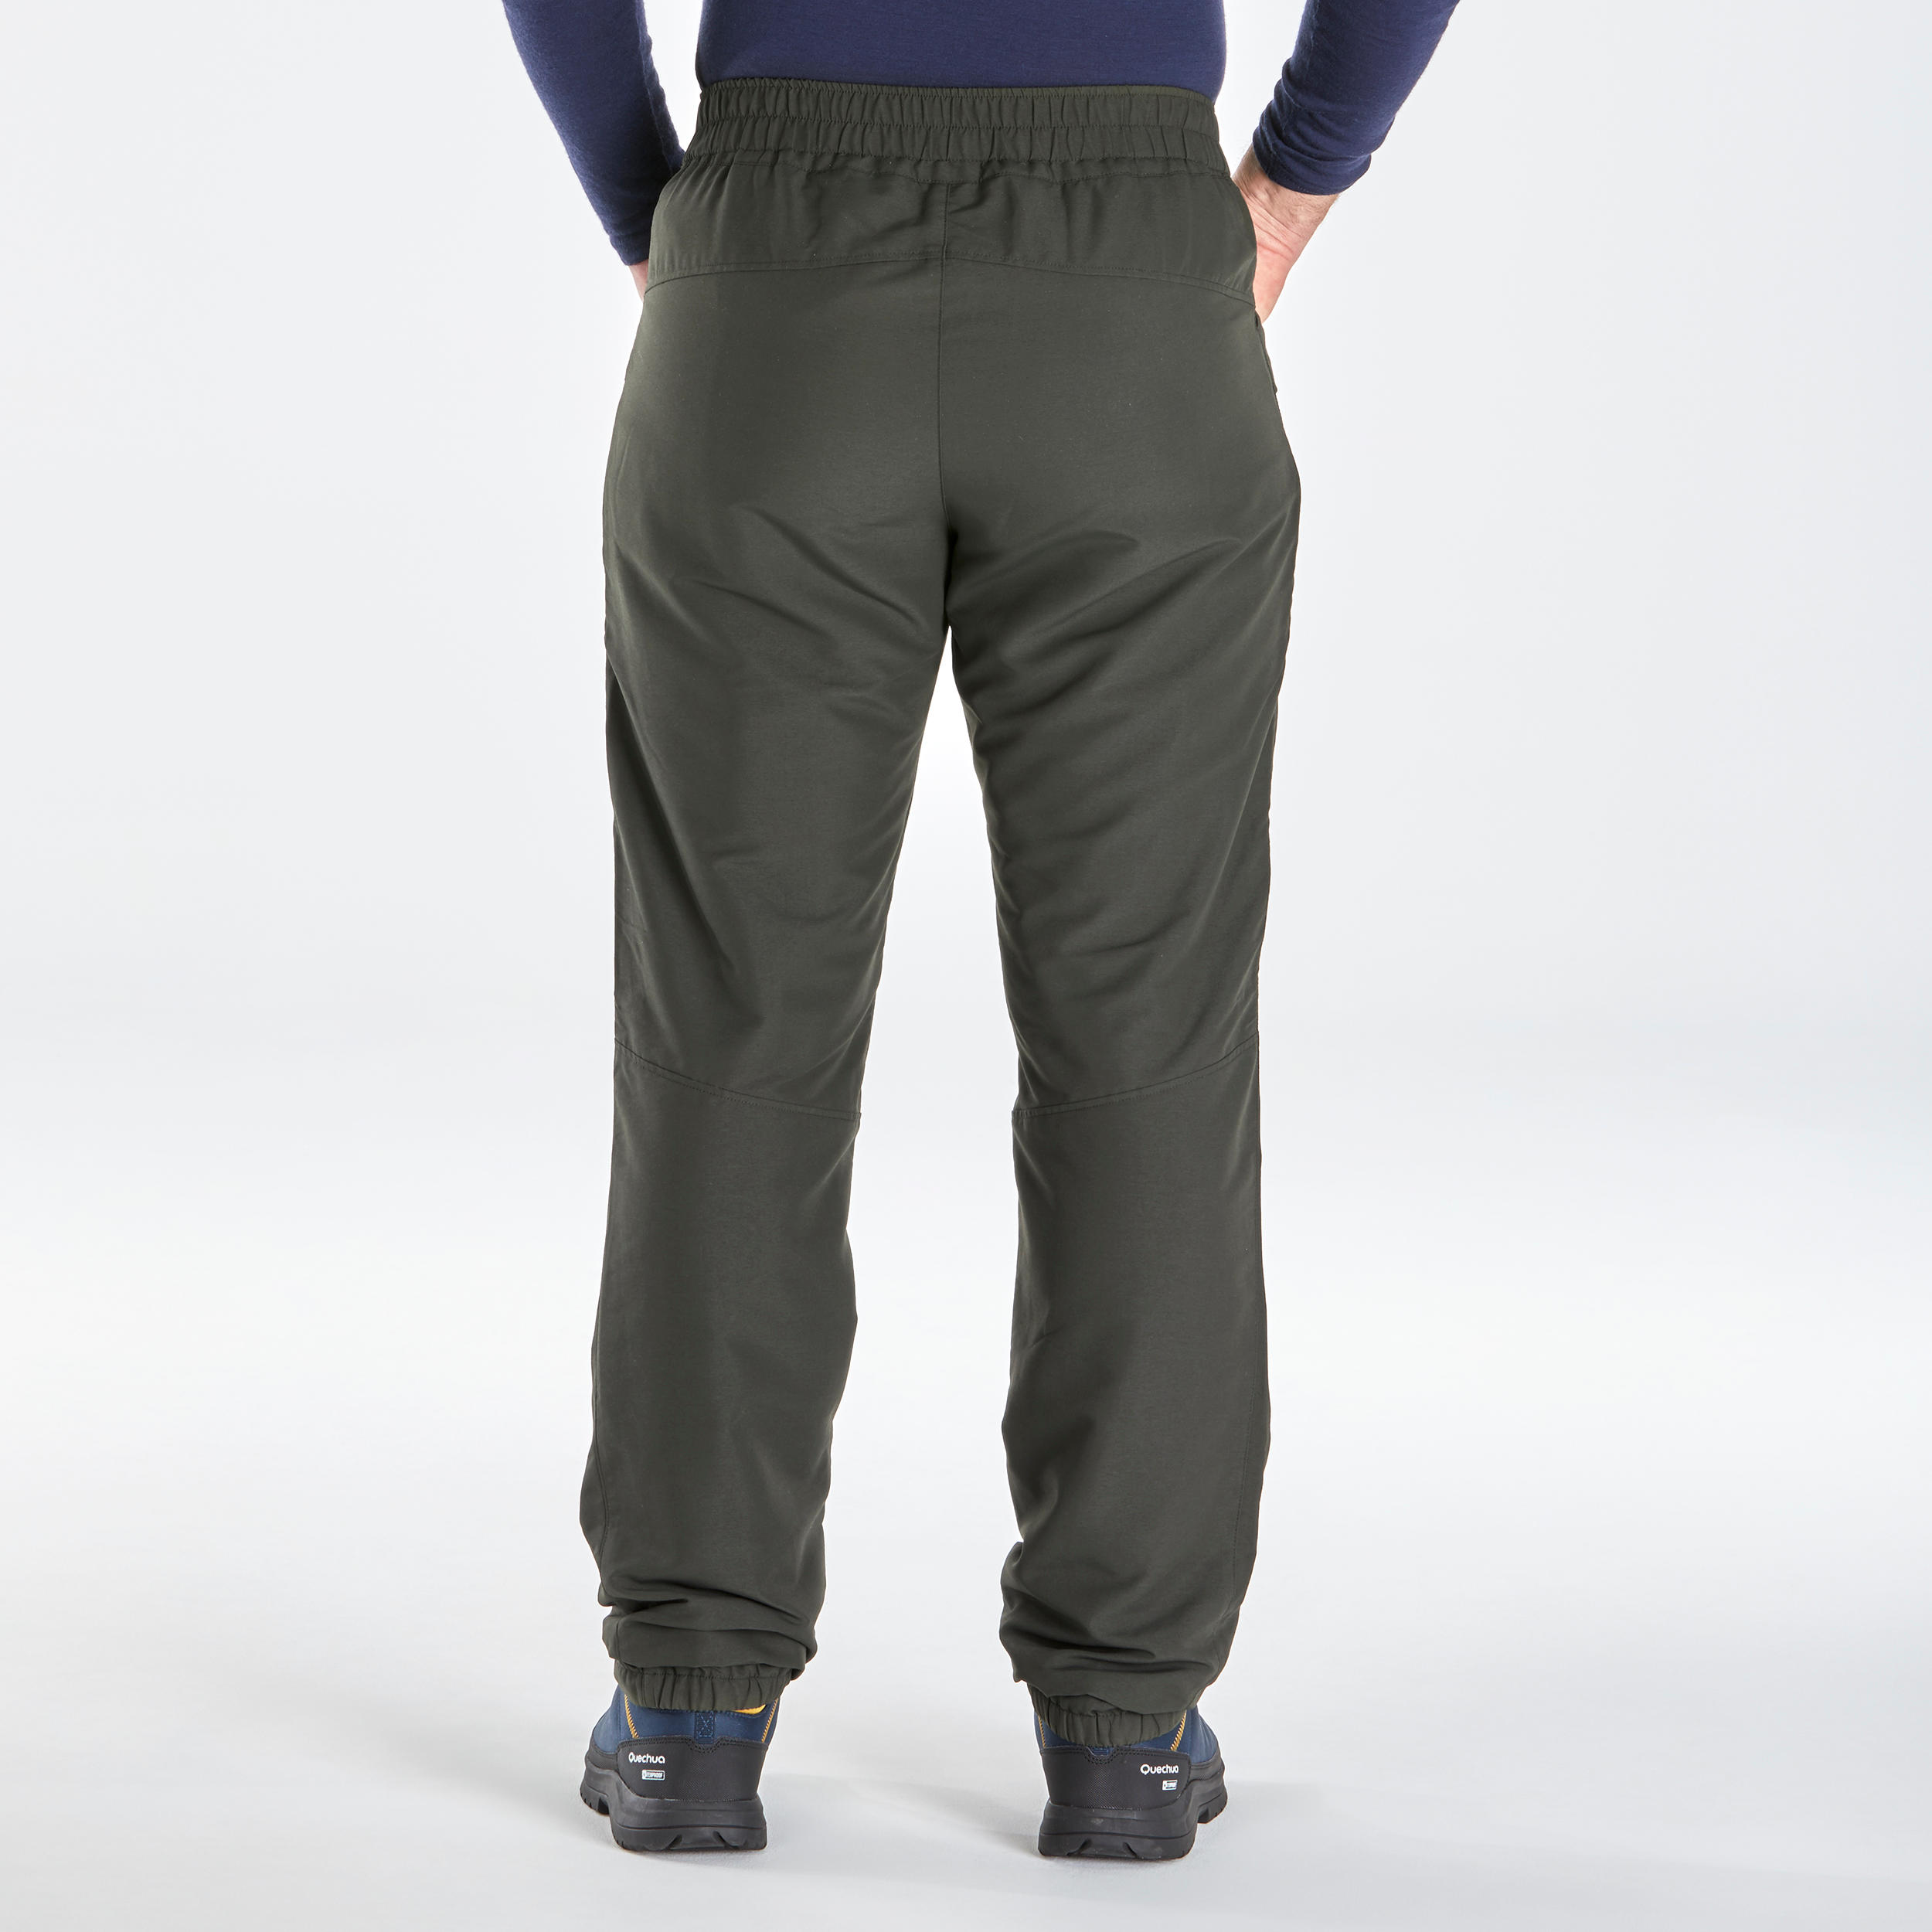 Men’s Warm Water-repellent Hiking Trousers  SH100  5/6